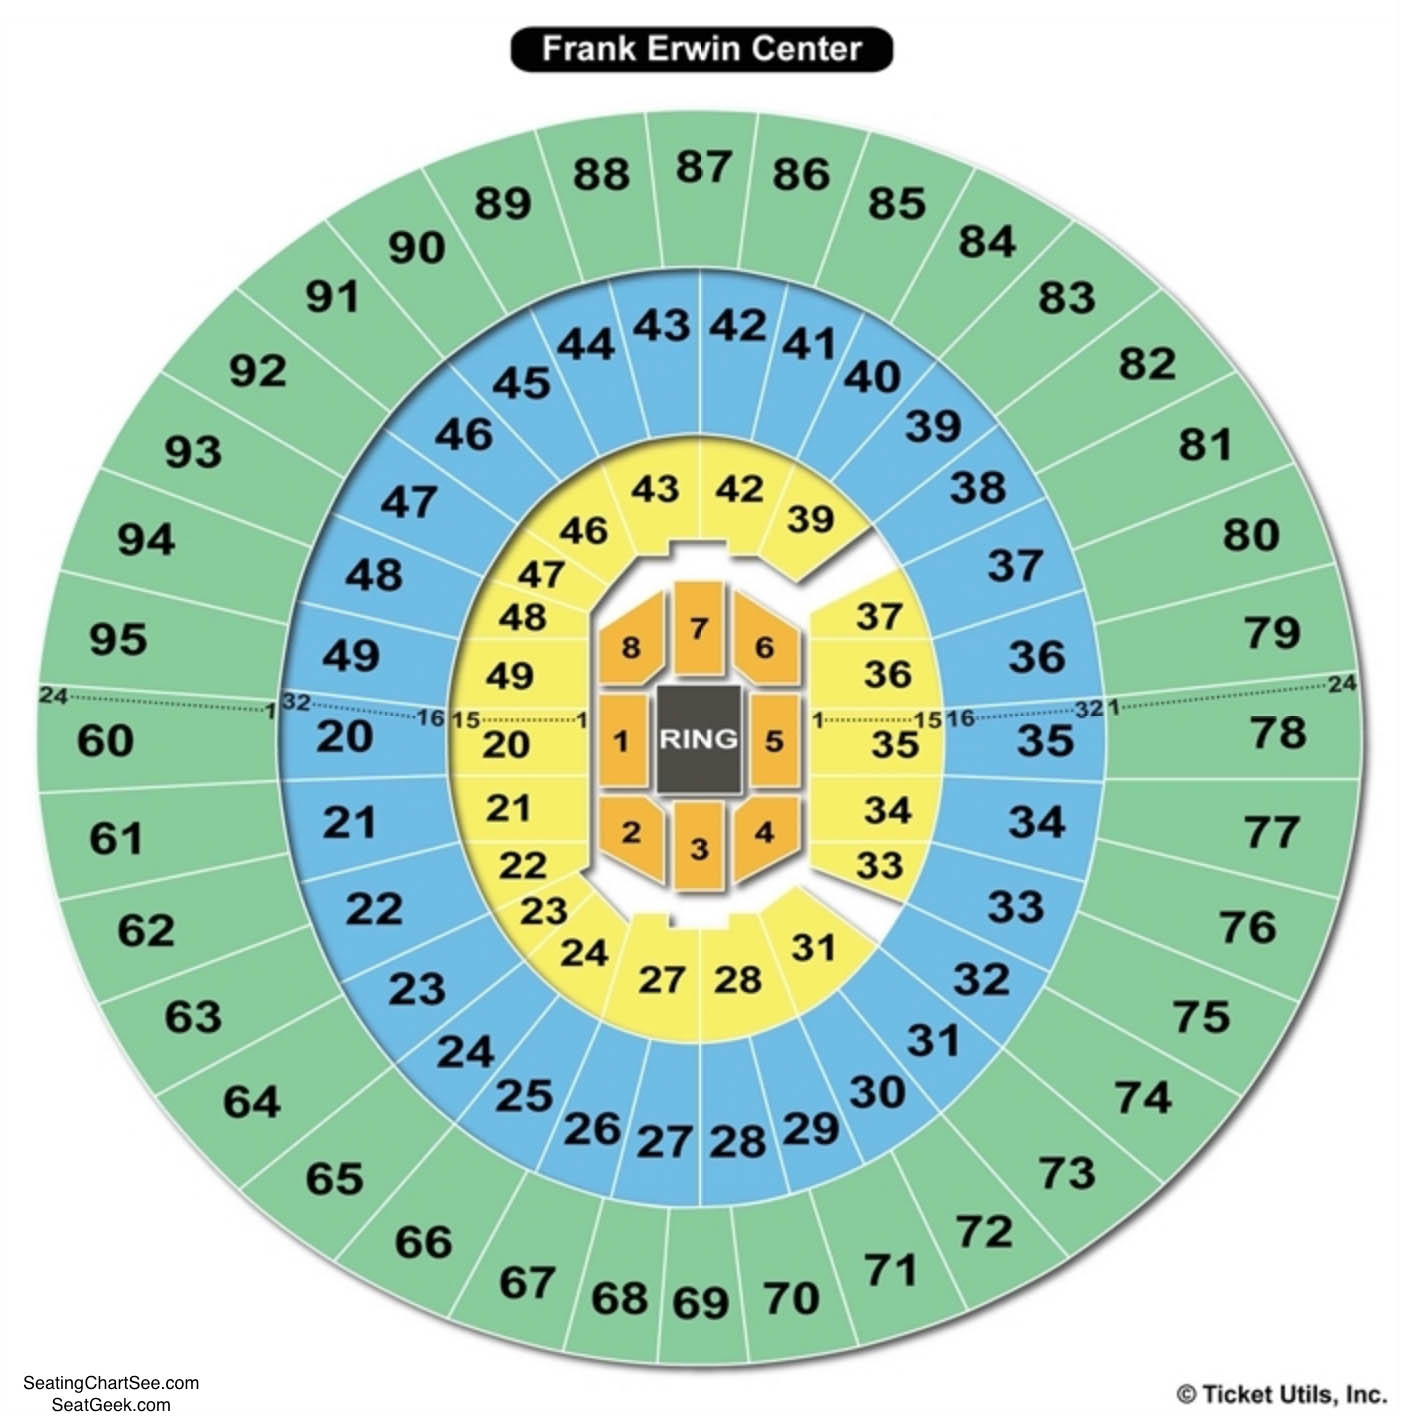 Frank Erwin Center Seating Charts | Games Answers & Cheats